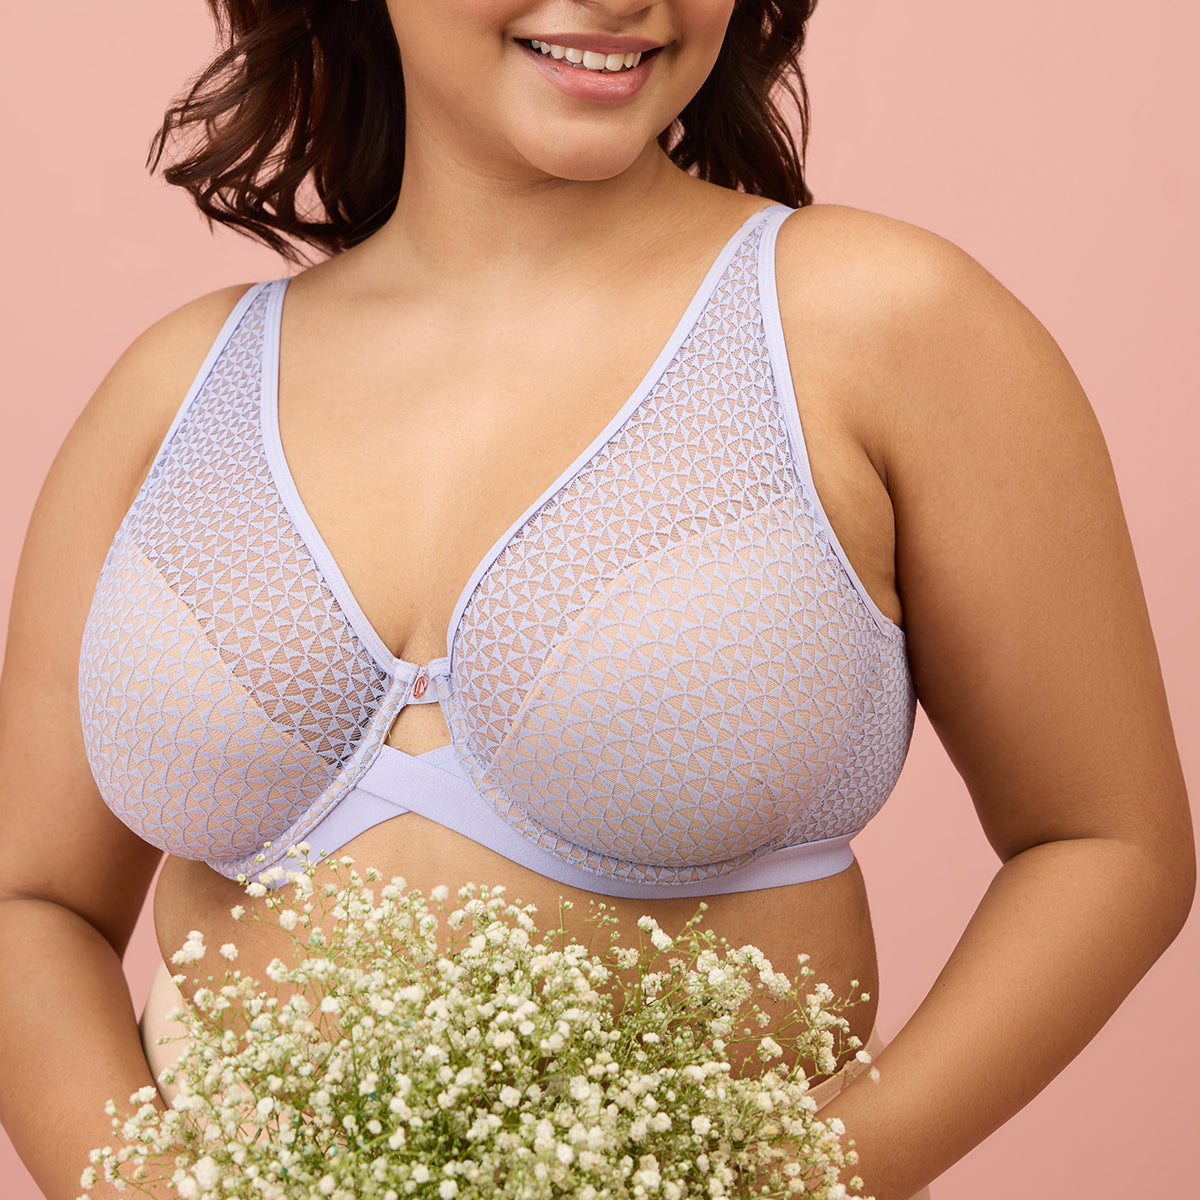 Nykd Textured Lace Support Bra - Non-Padded, Wired, Full Coverage - NYB140  Women T-Shirt Non Padded Bra - Buy Nykd Textured Lace Support Bra -  Non-Padded, Wired, Full Coverage - NYB140 Women